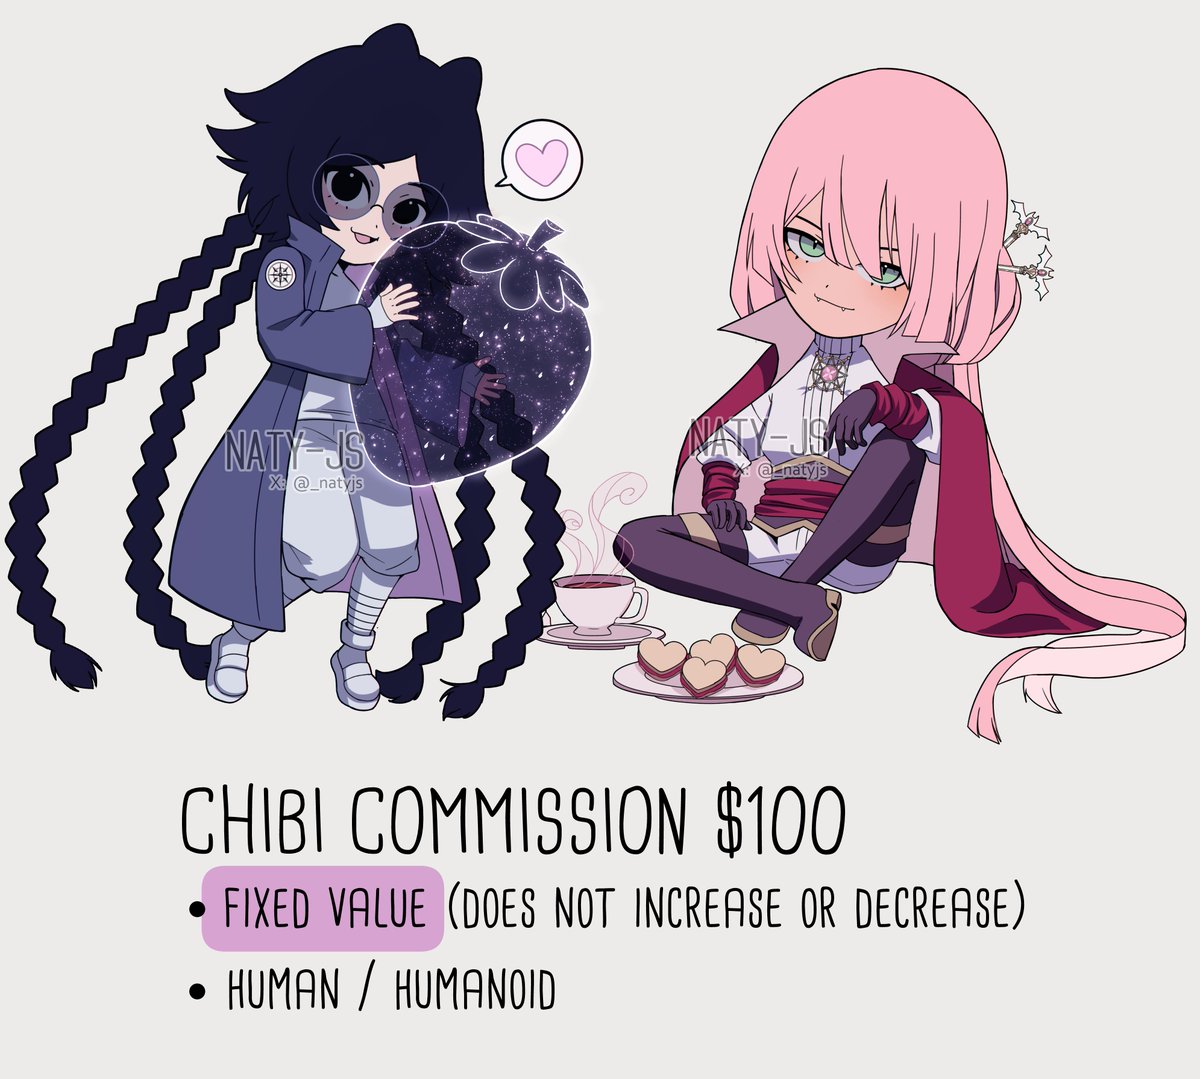 #CHIBICOMMISSION $100
🌷The value does not increase or decrease 
​🌷100% per extra character
🌷You only see the final result, you cannot see the sketch process pic.
#commissionsopen #chibicomissions #commissionsinfo #commisions
(+)